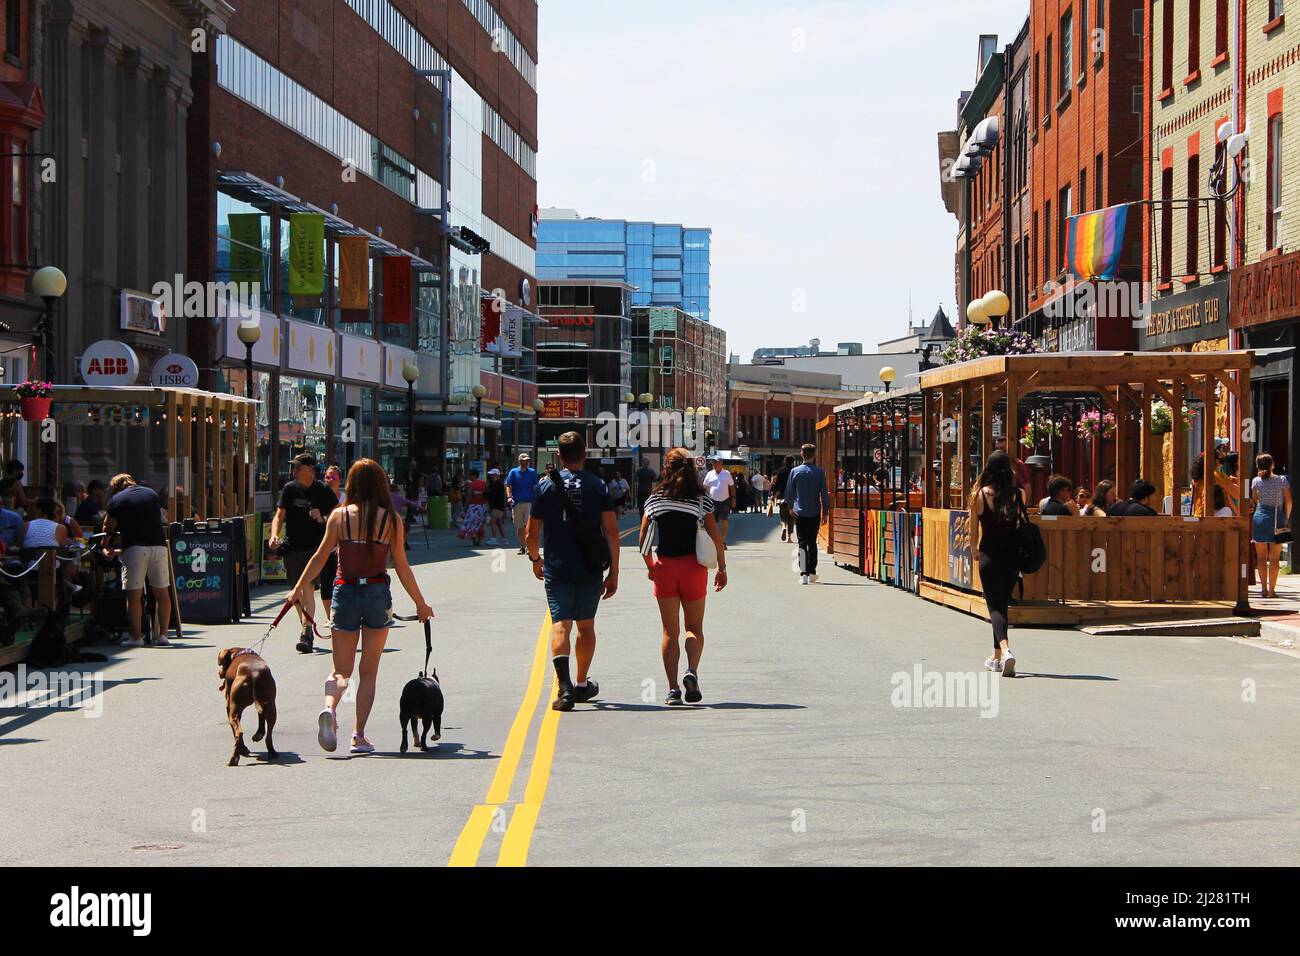 People at a downtown pedestrian mall, St. John's, Newfoundland. Stock Photo